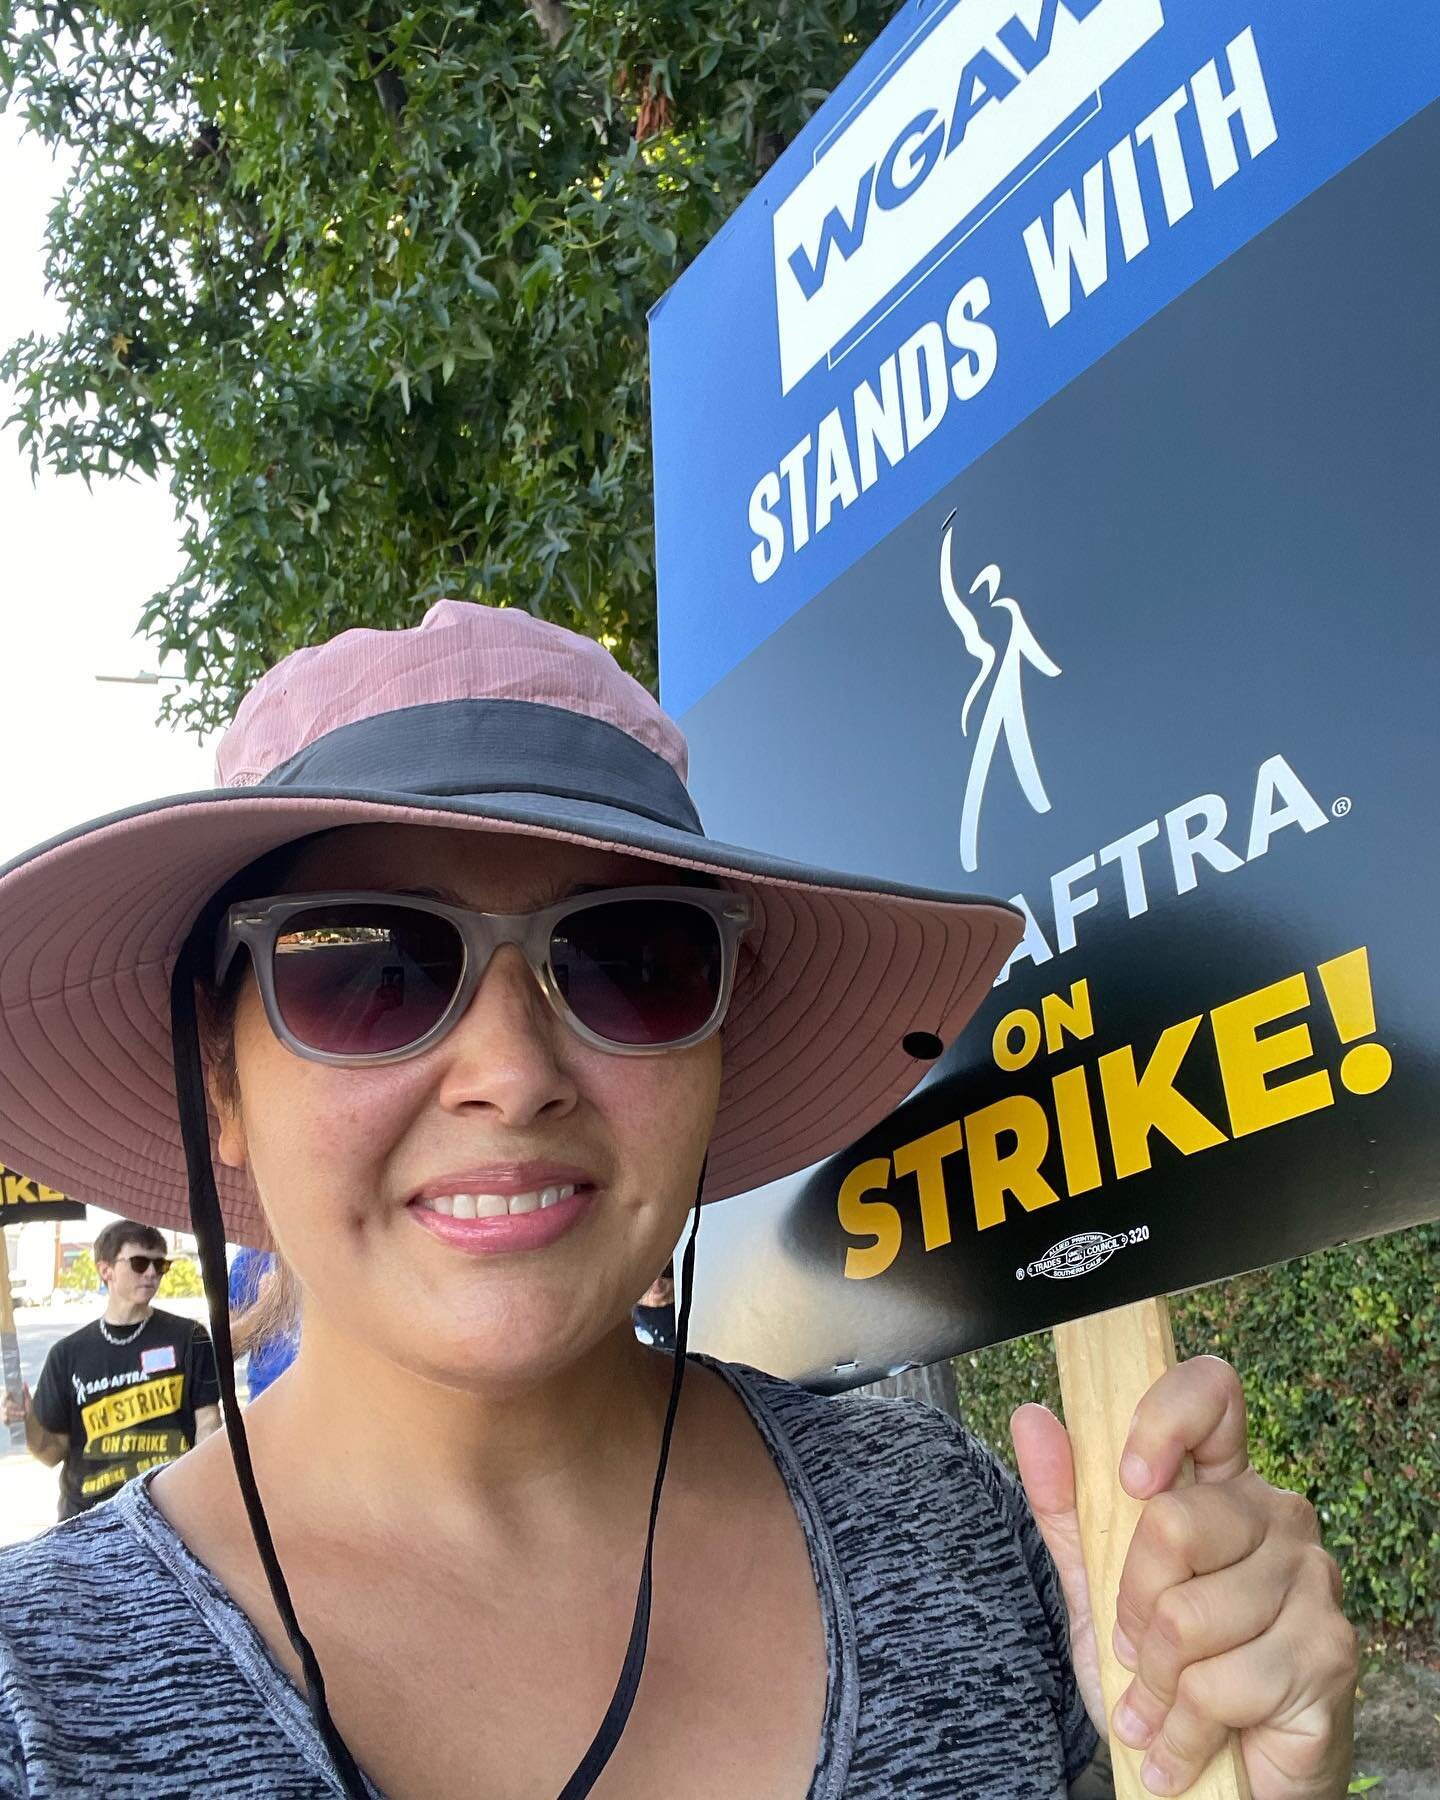 You didn&rsquo;t think we were done, did you? Not until @sagaftra has a deal too!

WGA supports SAG-AFTRA!

#sagaftrastrong #sagaftrastrike #wgastrong